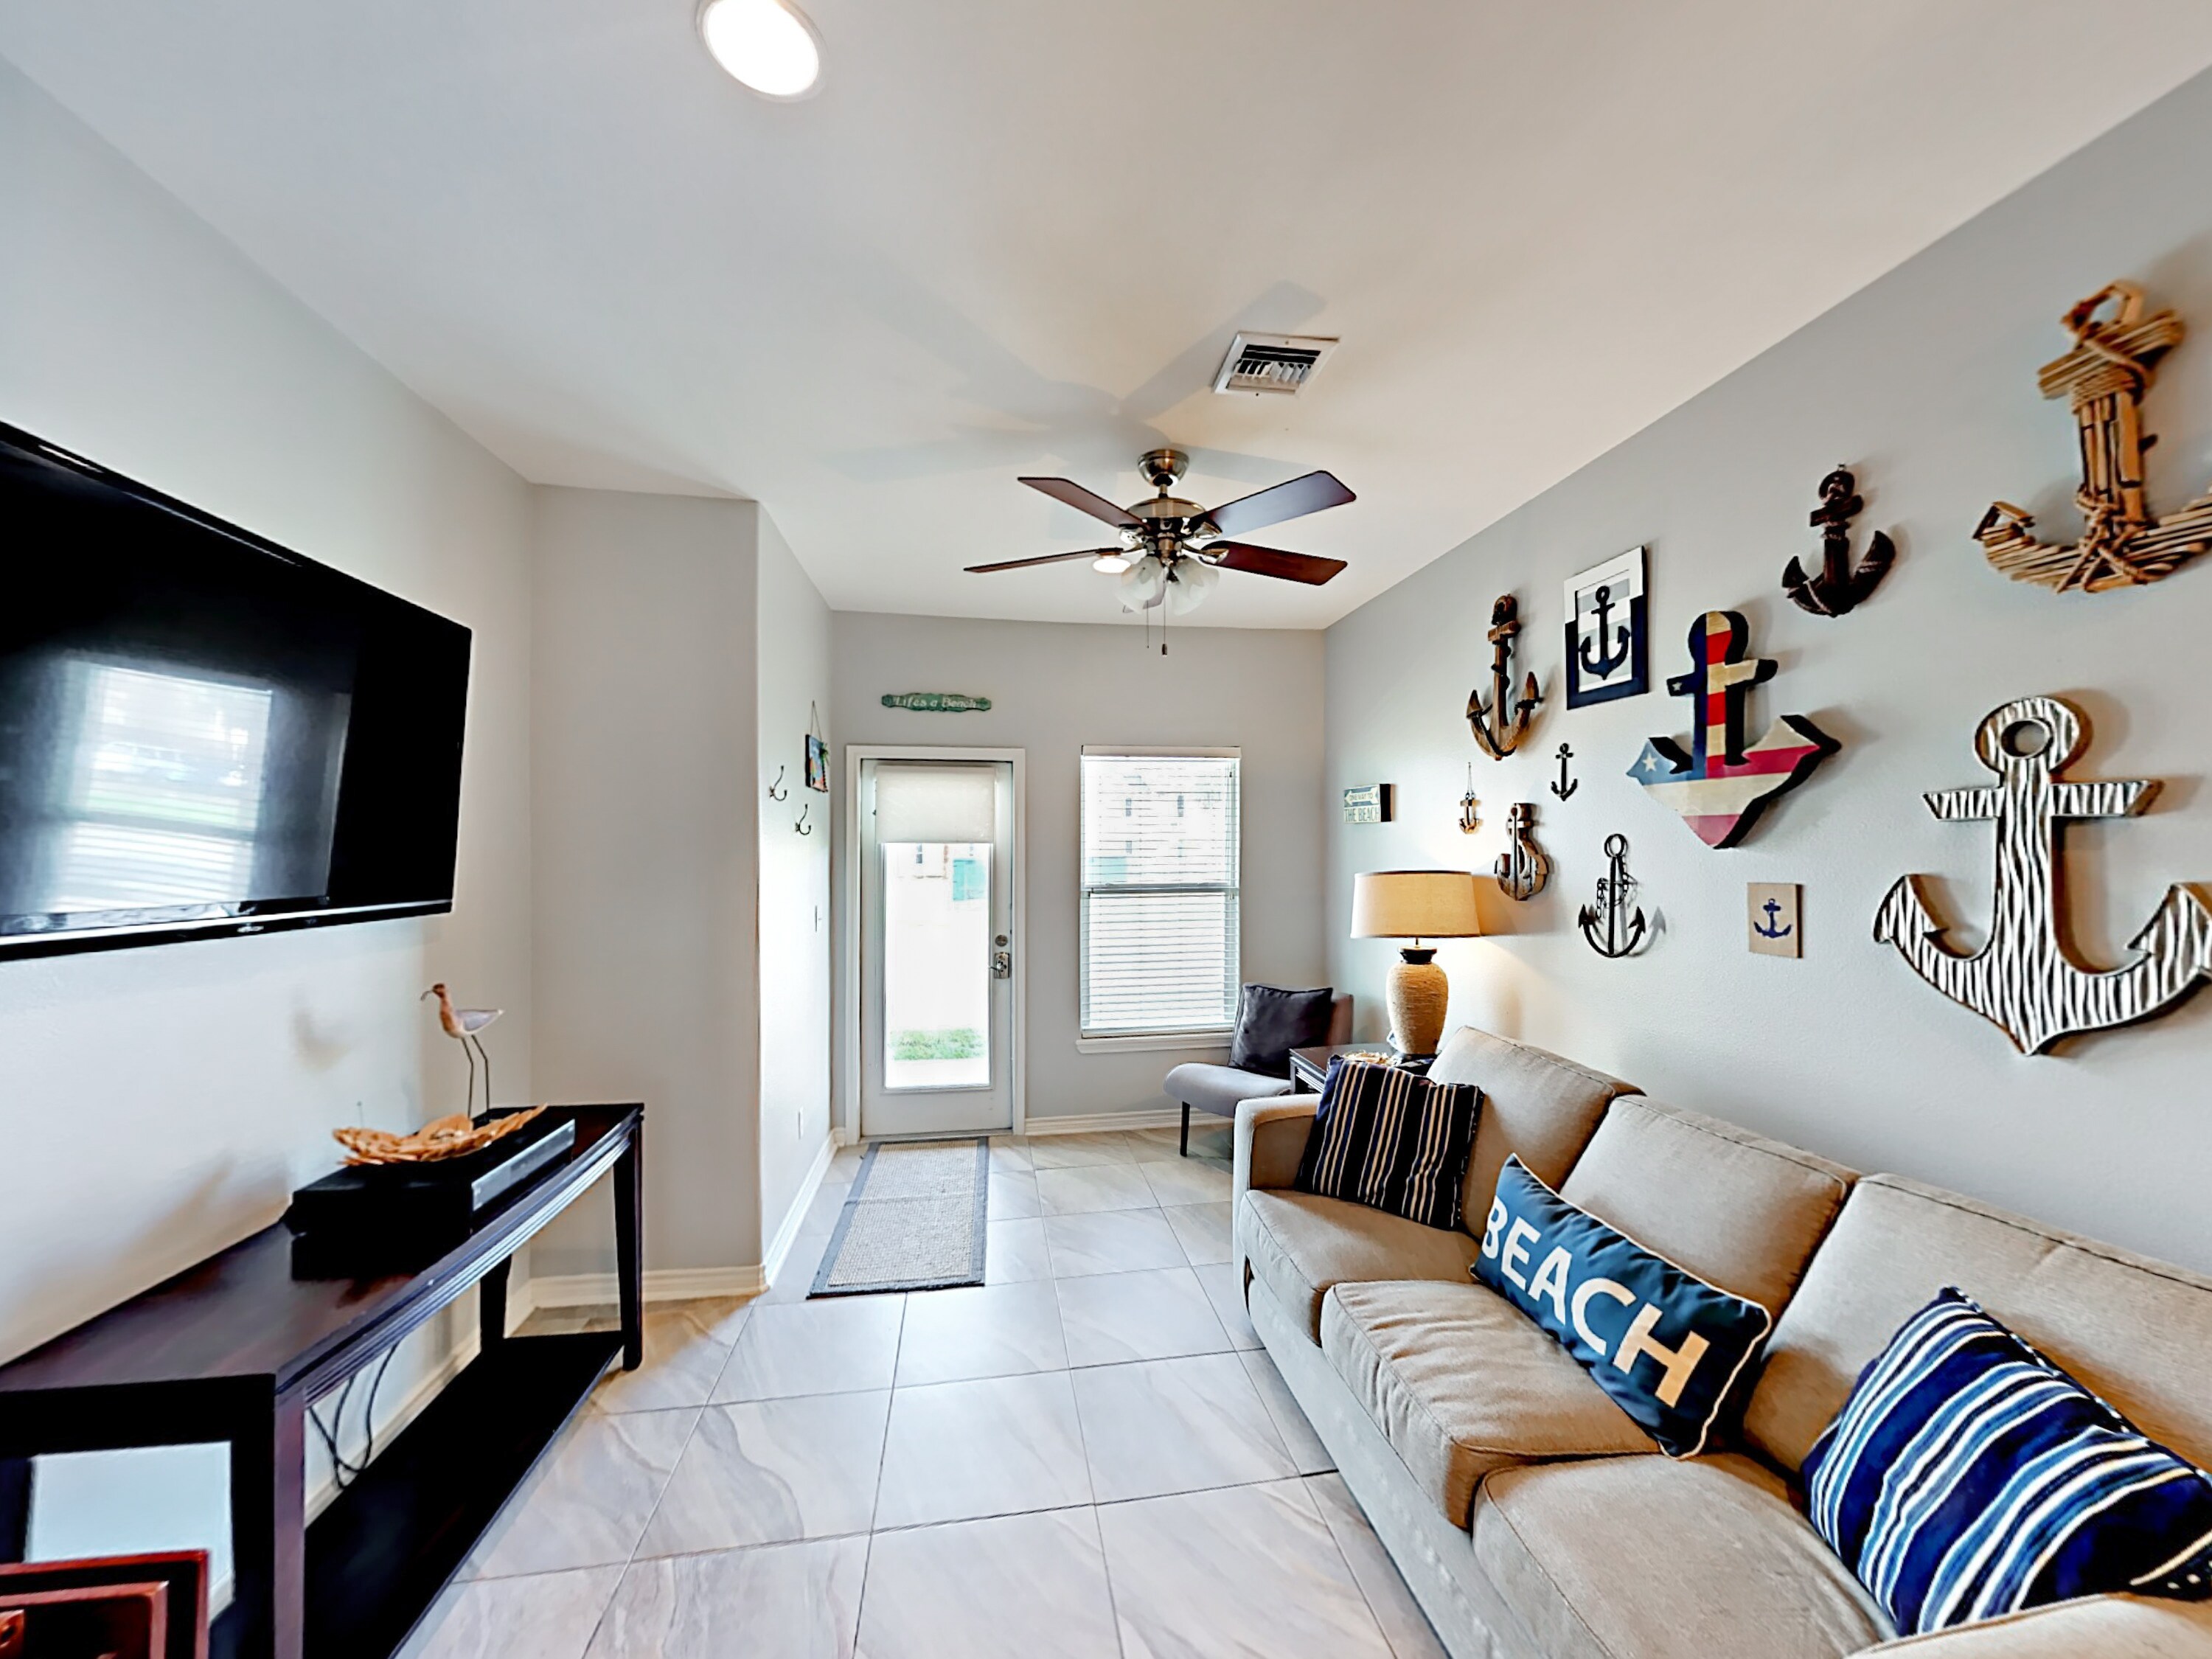 Welcome to Port Aransas! This townhouse is professionally managed by TurnKey Vacation Rentals.